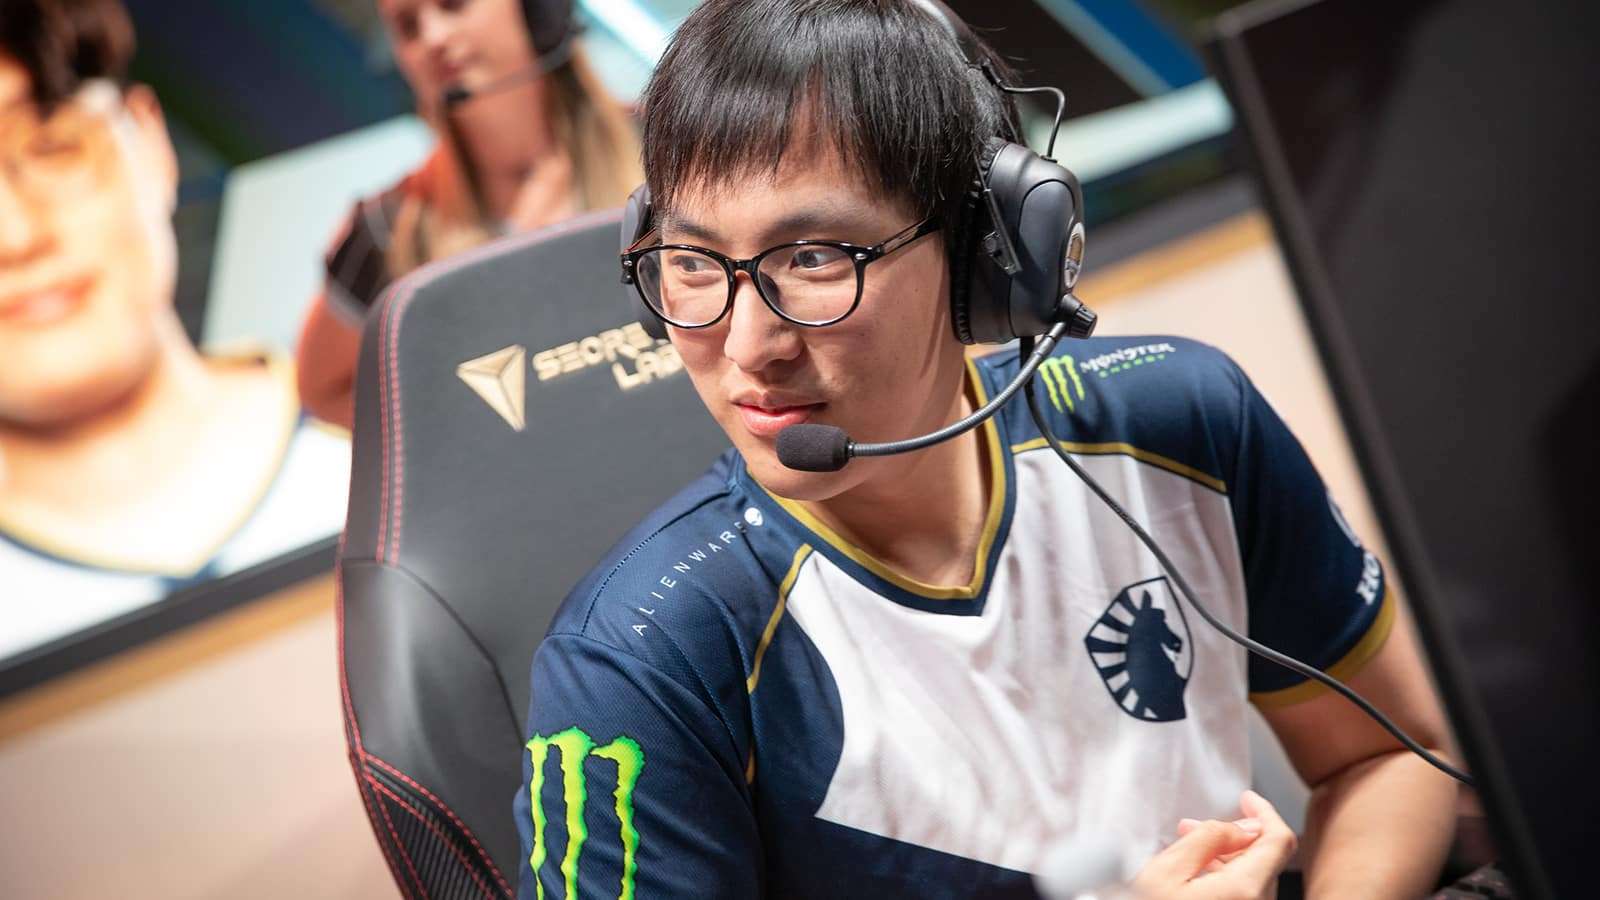 Doublelift playing for Team Liquid in LCS.